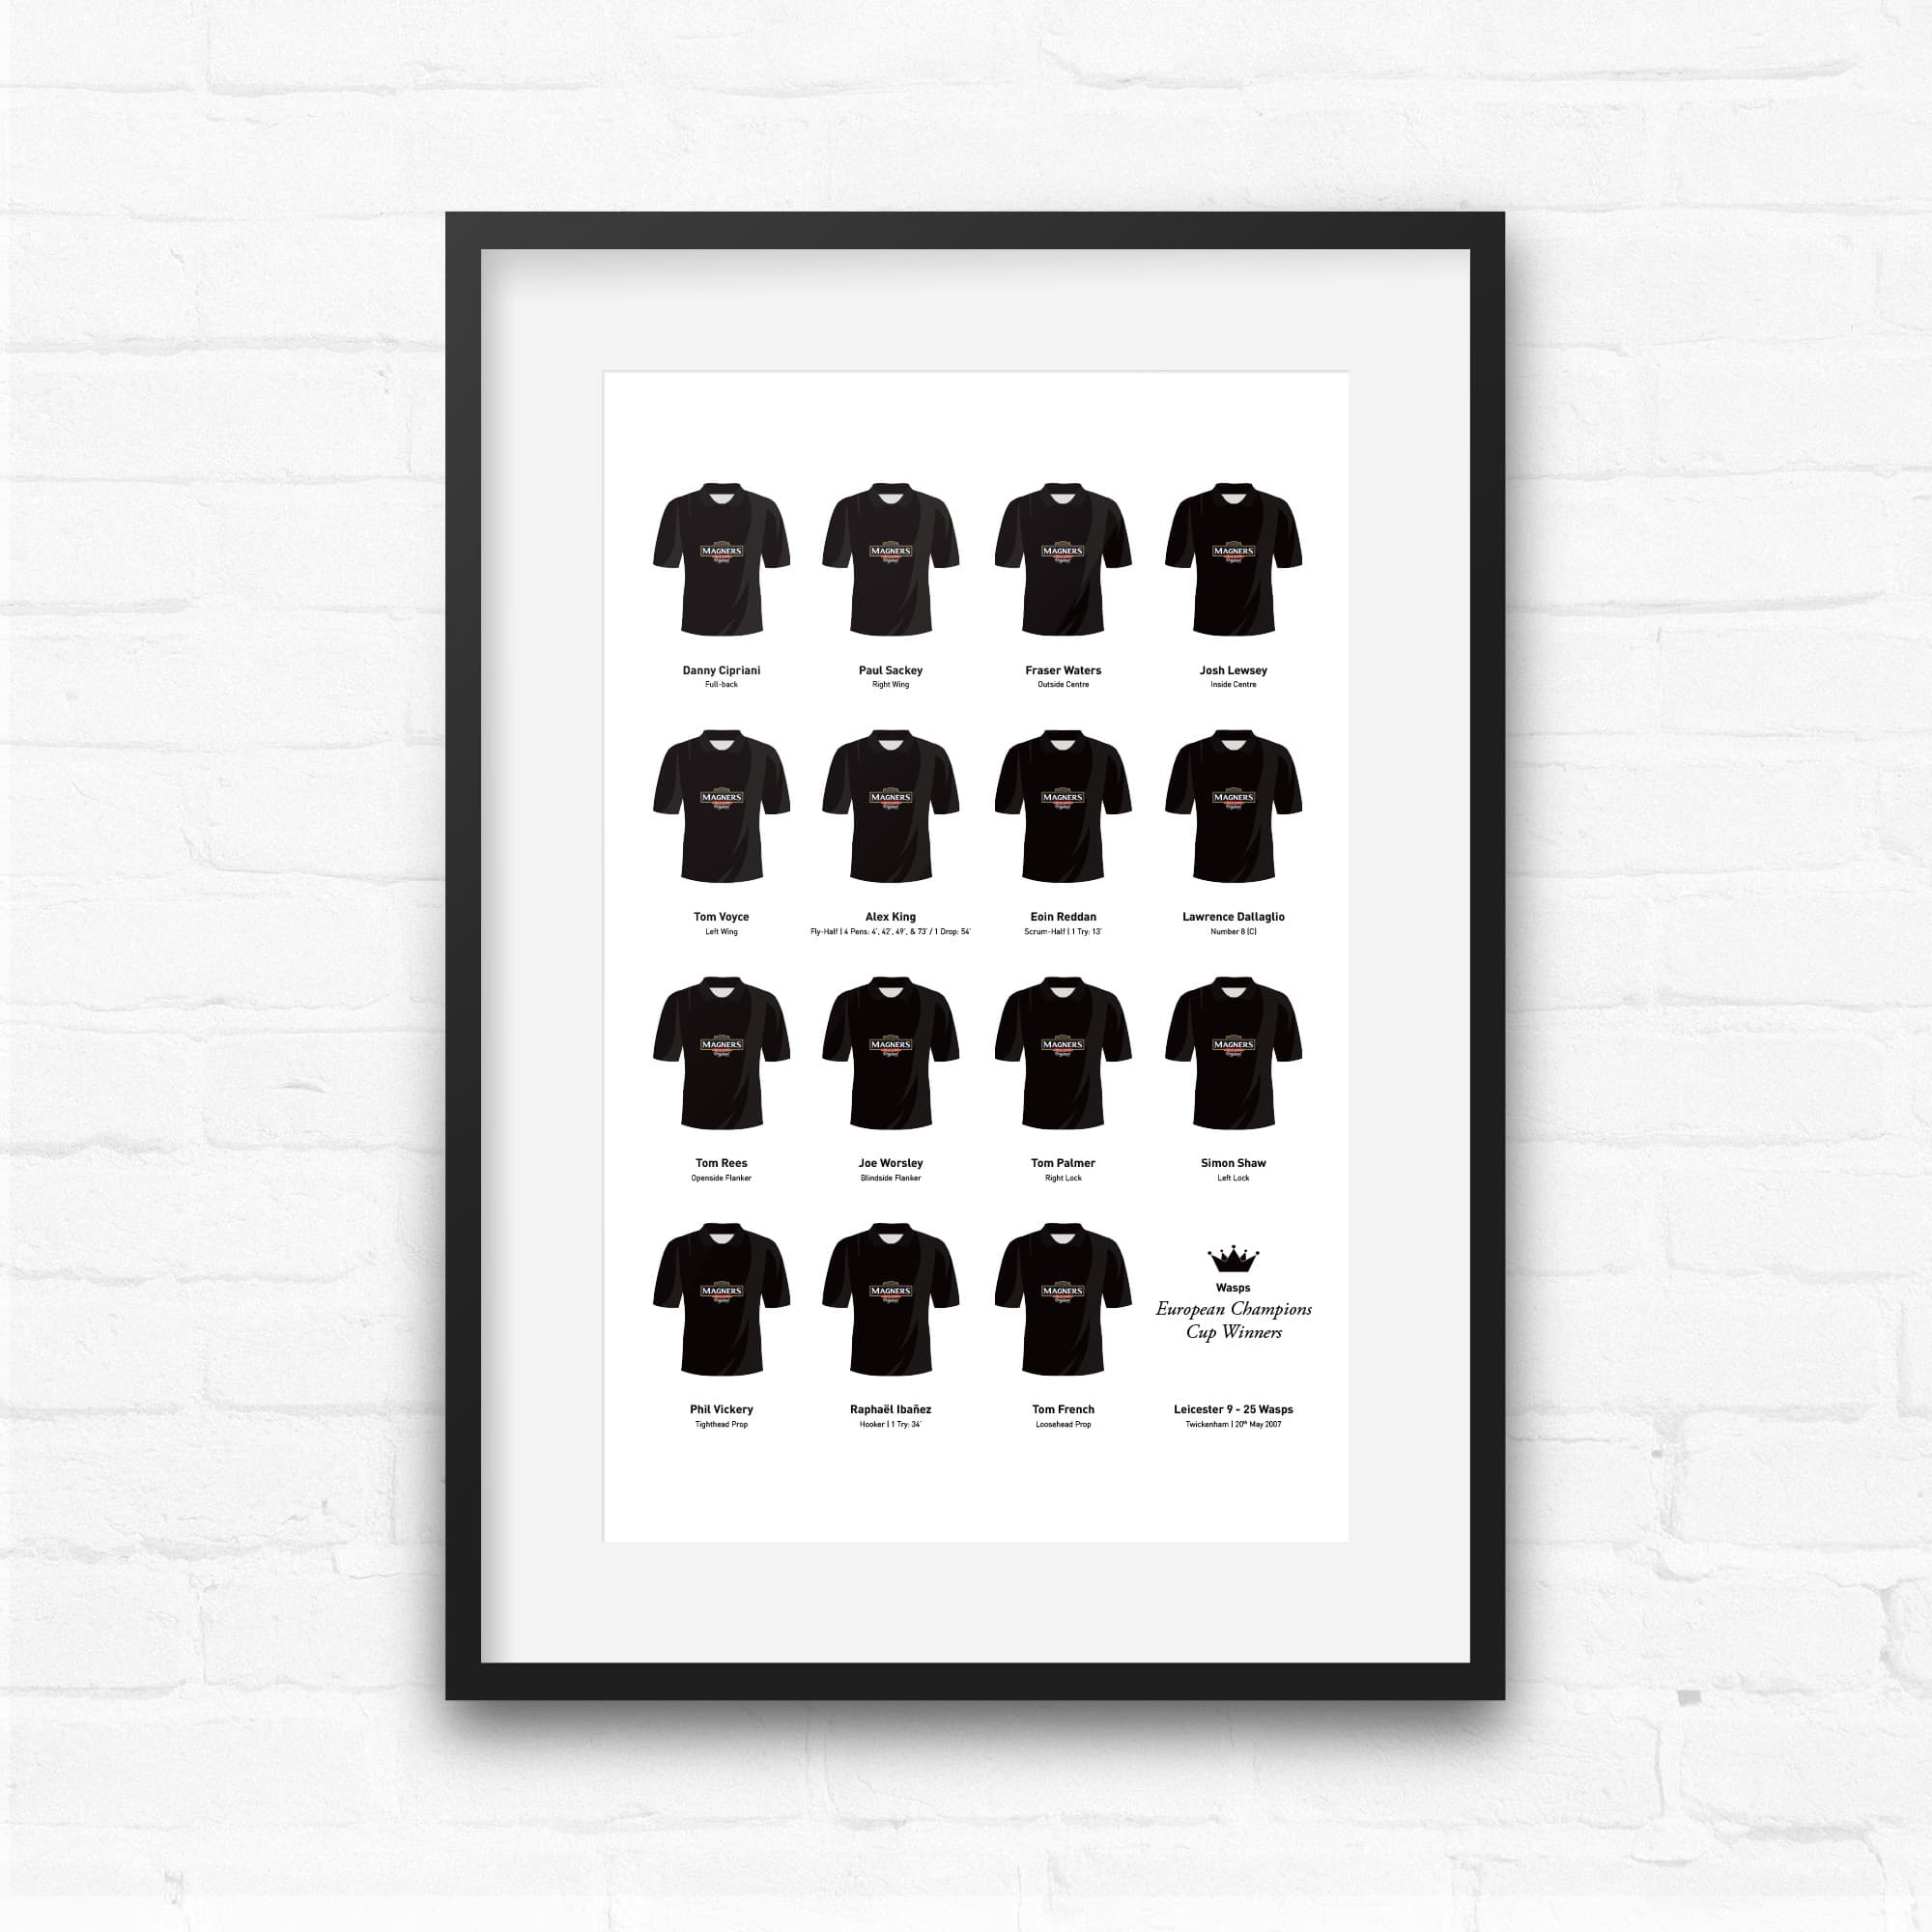 Wasps Rugby Union 2007 European Champions Cup Winners Team Print